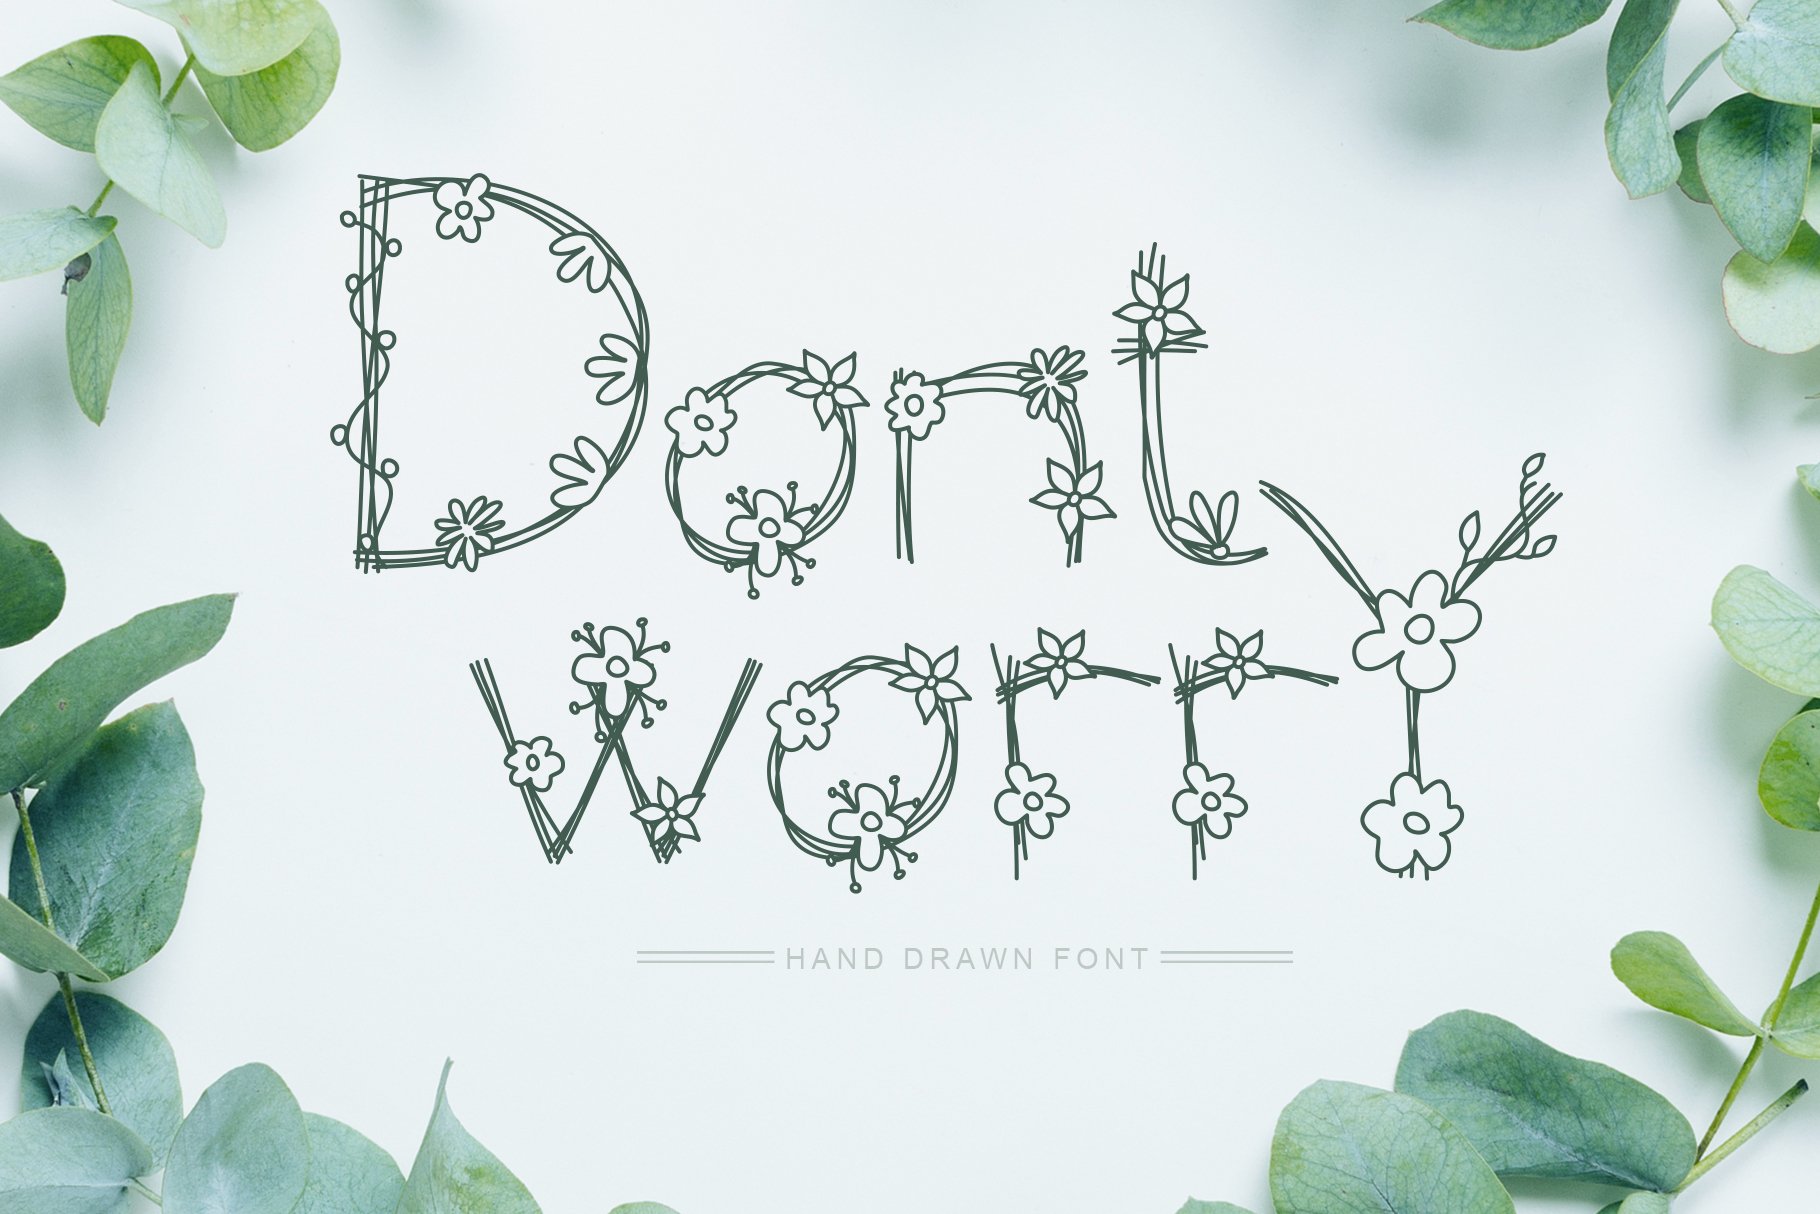 Dont Worry Hand Drawn Font cover image.